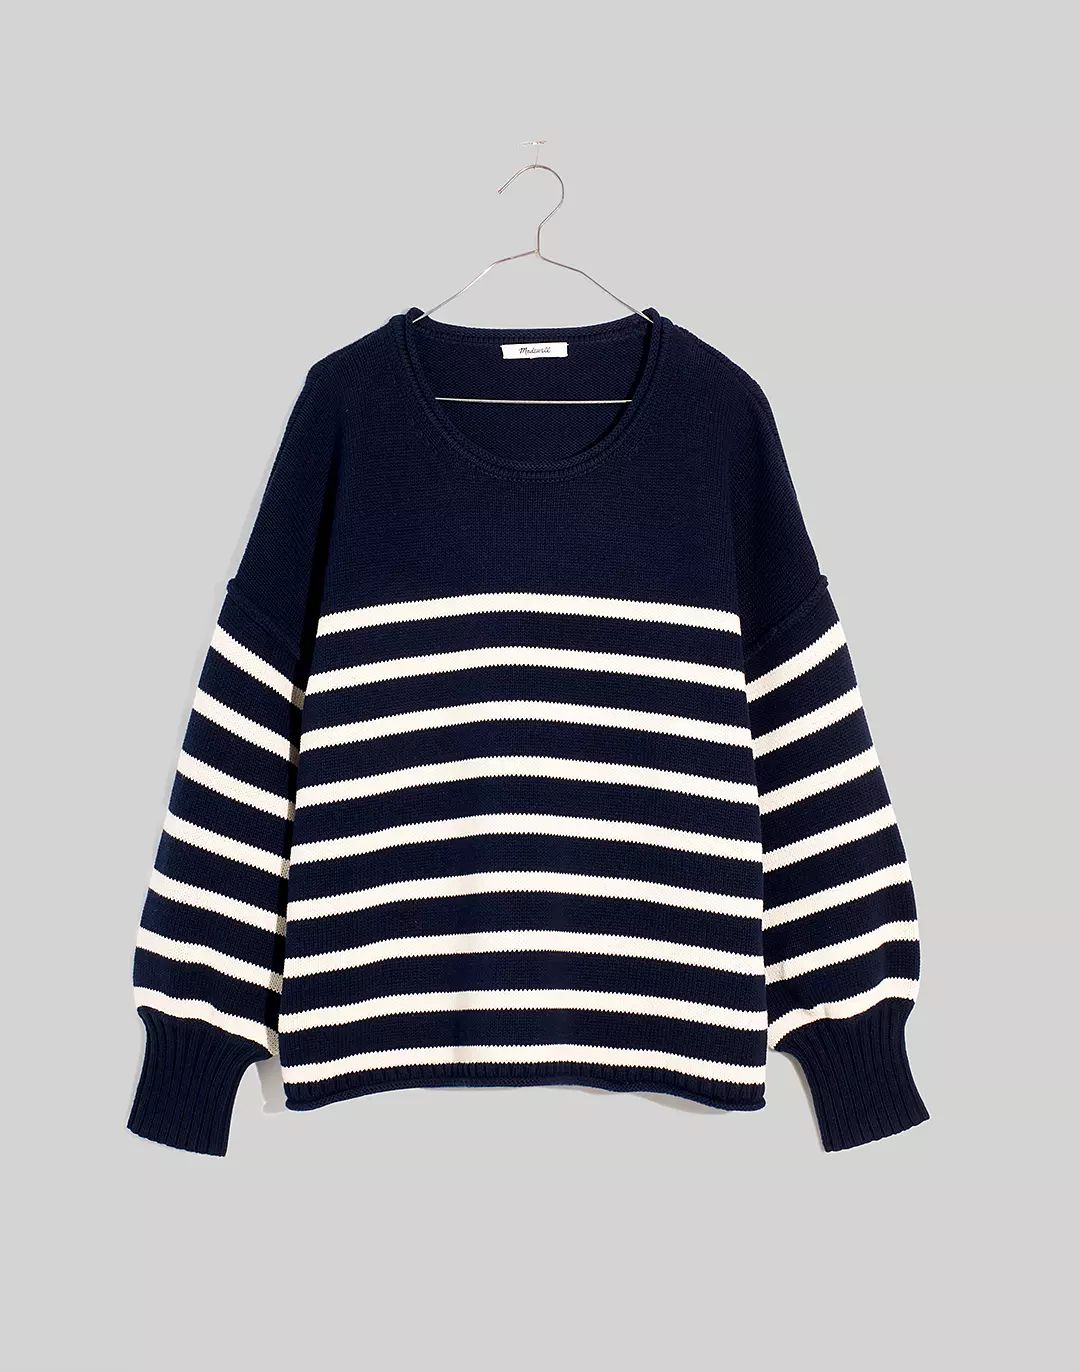 Conway Pullover Sweater in Stripe | Madewell